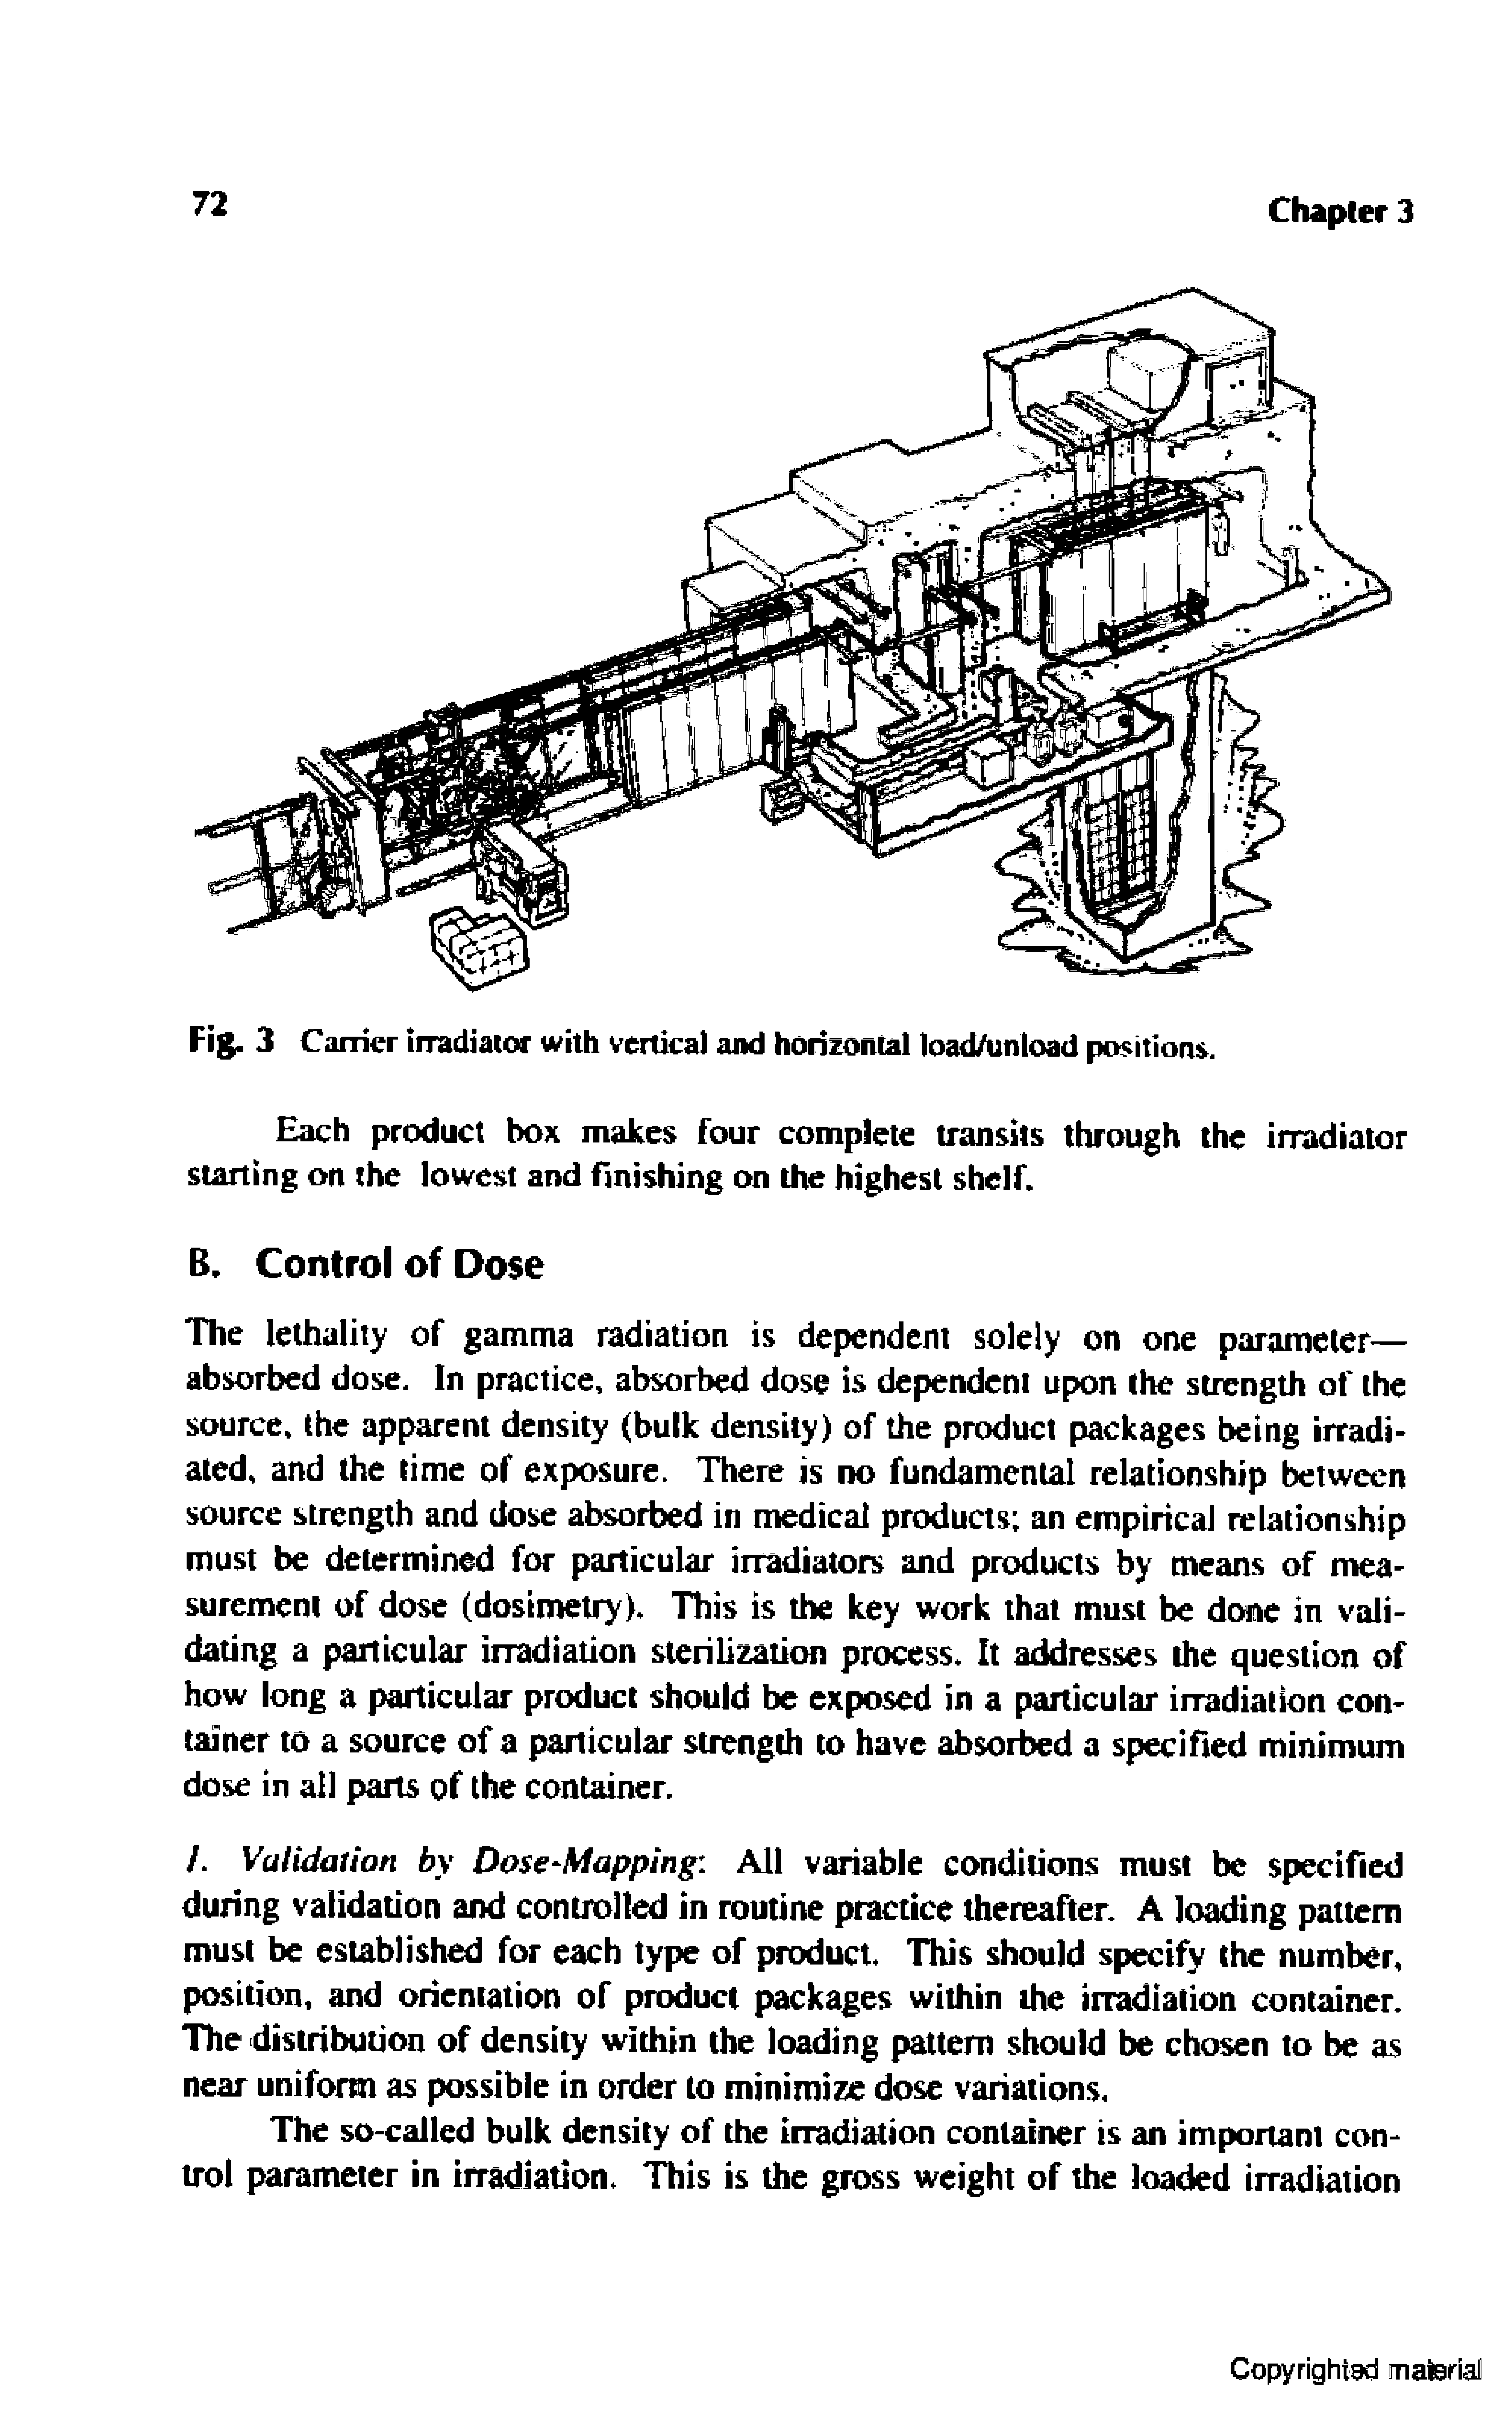 Fig. 3 Carrier irradiator with vertical ajid horizontal load/unload positions.